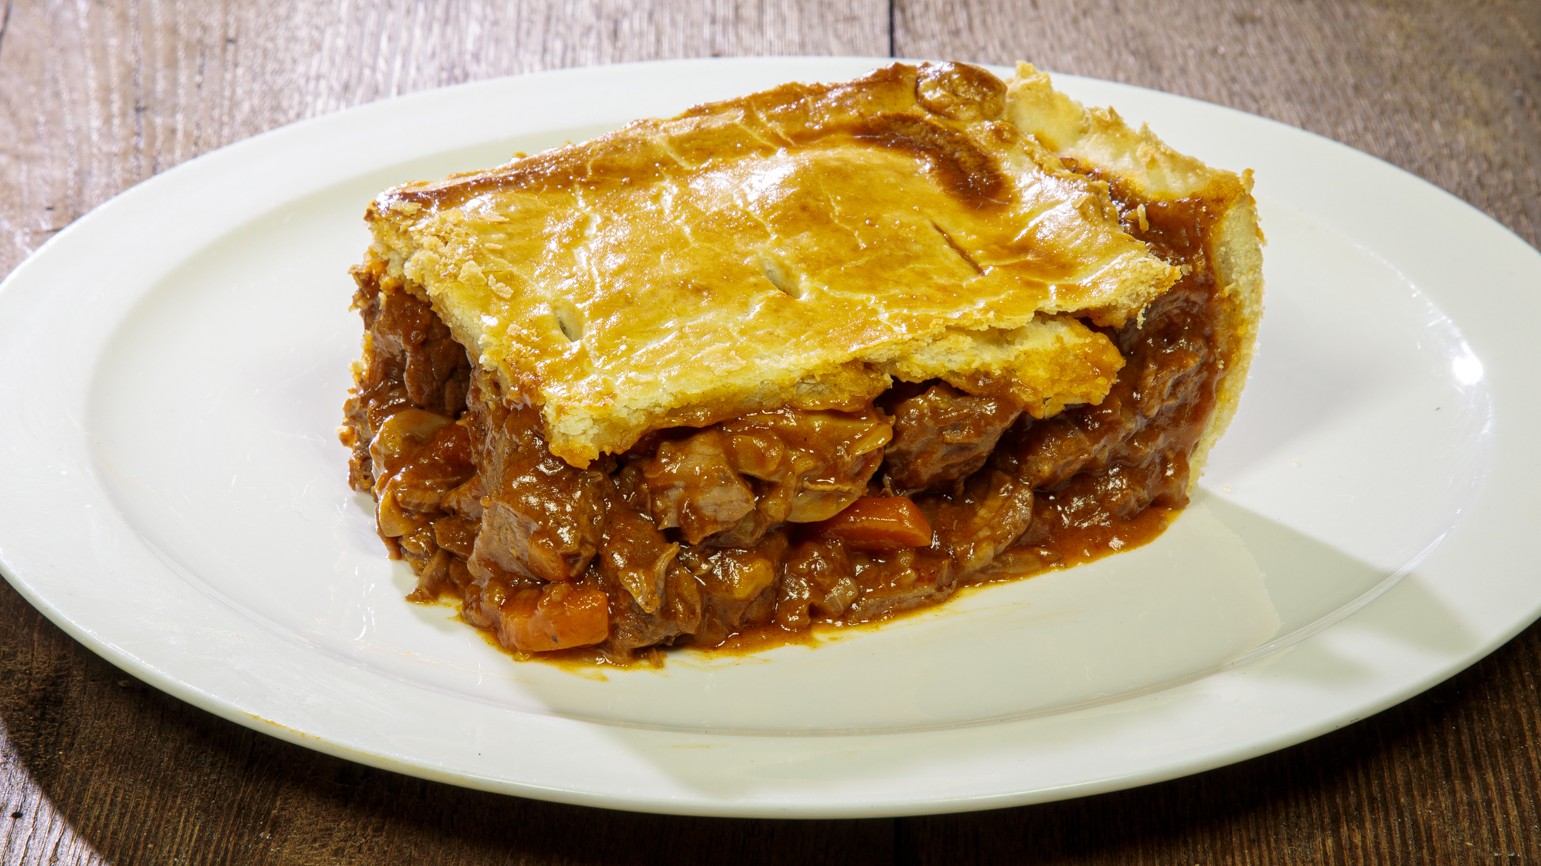 Steak and Ale Pie